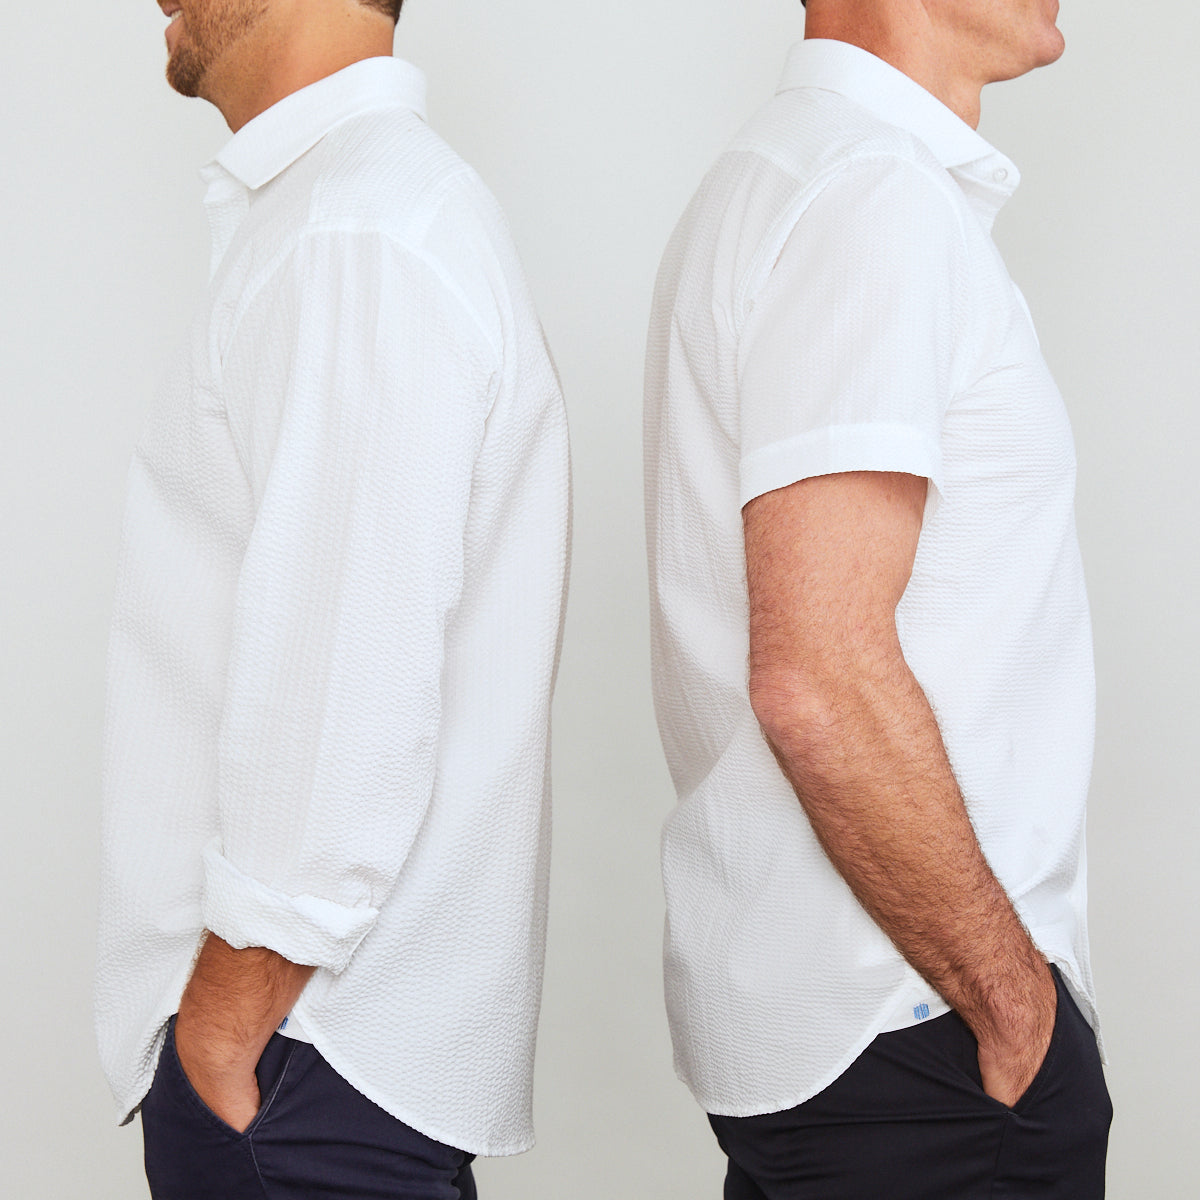 A solid look for a solid guy. THE white shirt you need this season. Seersucker, lightweight, and supremely cool. Available in short or long sleeve.  100% Cotton Seersucker  •  Spread Collar  •  Long Sleeve  •  Chest Pocket  •  Machine Washable  •  Made in Italy 